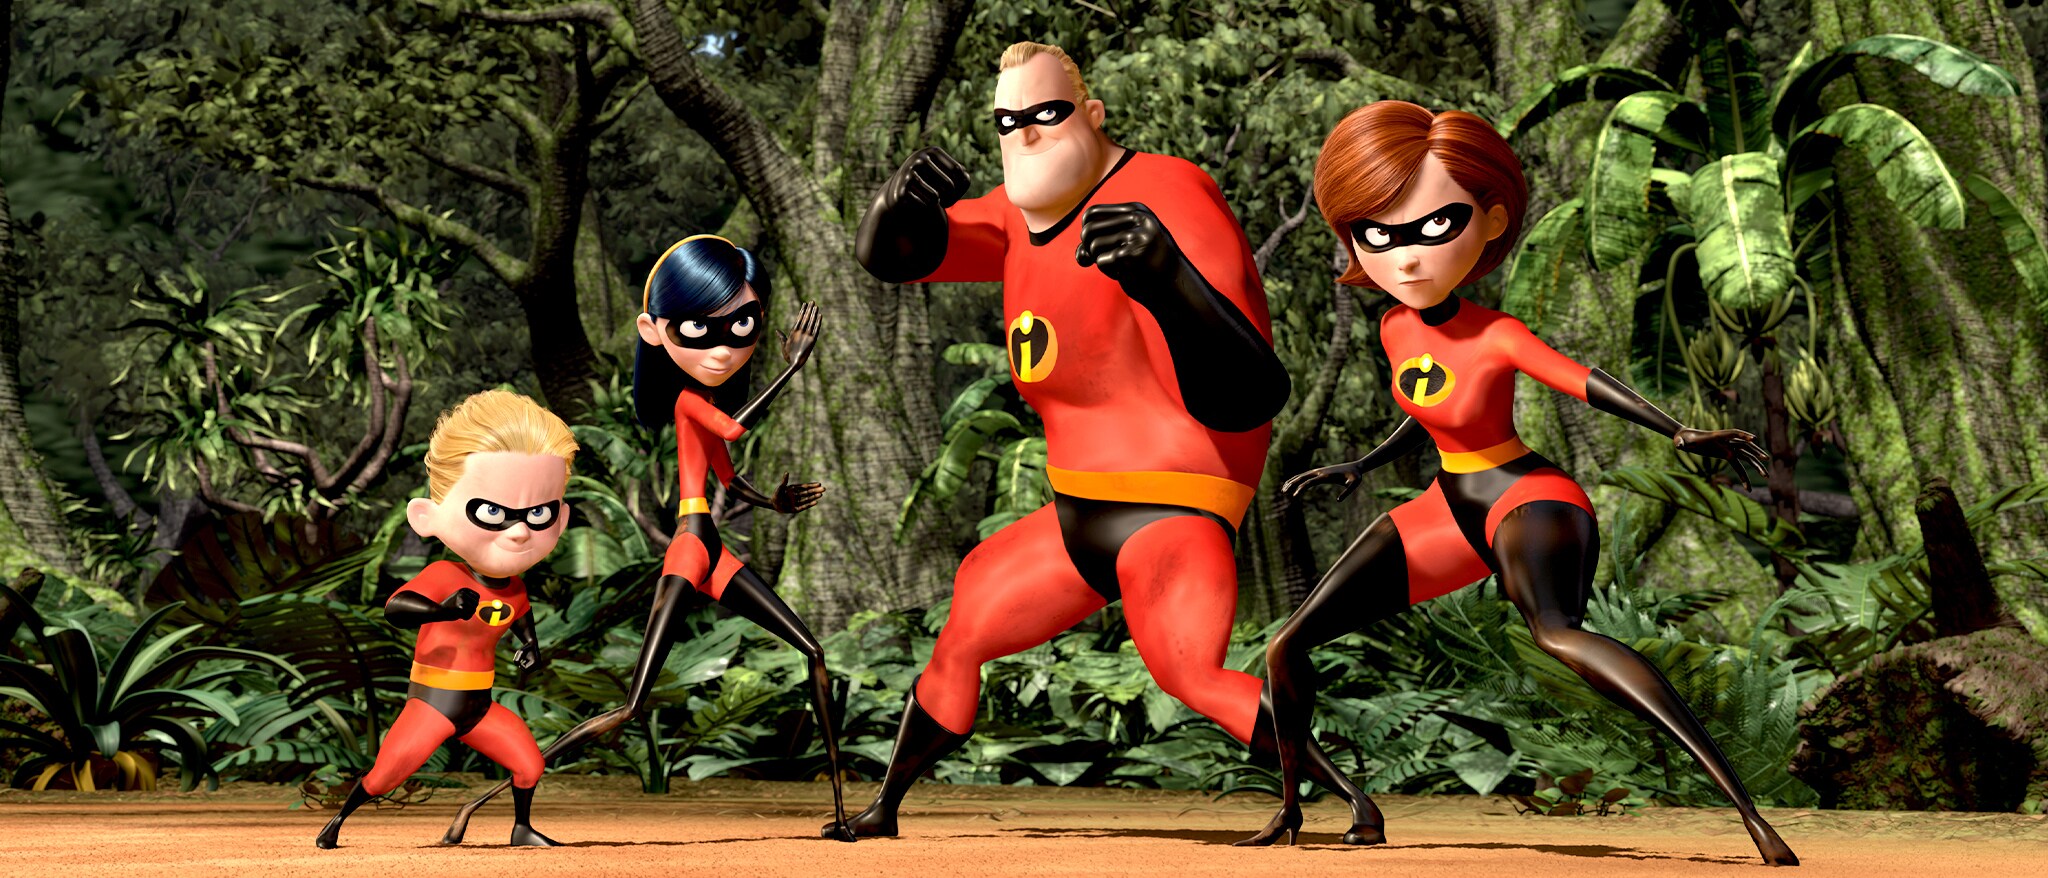 h theincredibles 19751 493aad32